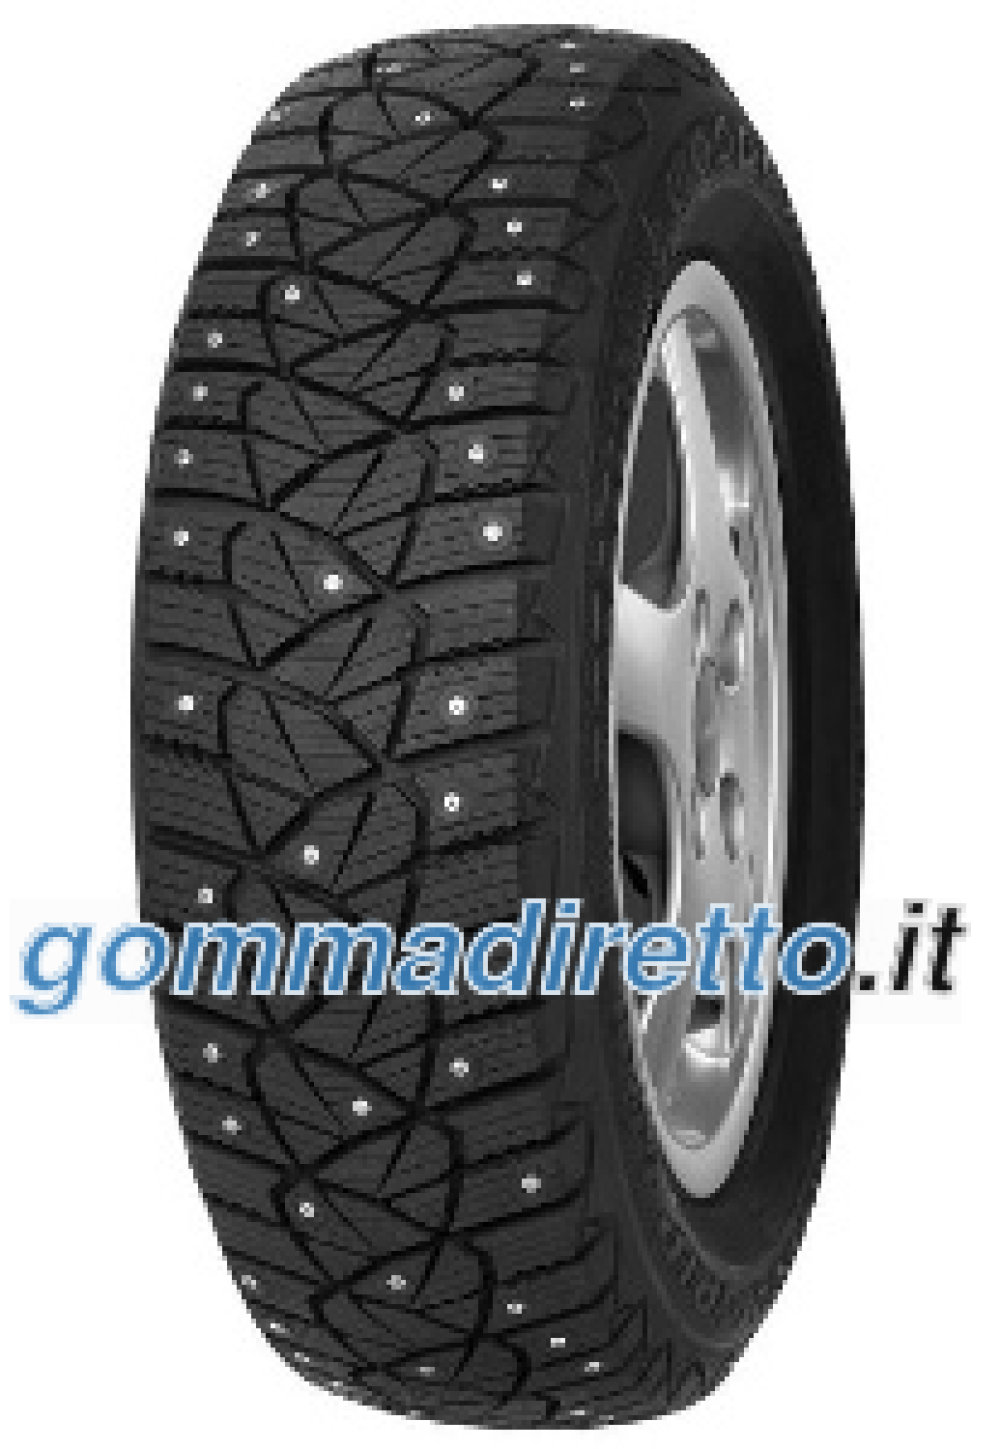 Image of Goodyear Ultra Grip 600 ( 195/65 R15 95T XL, pneumatico chiodato )